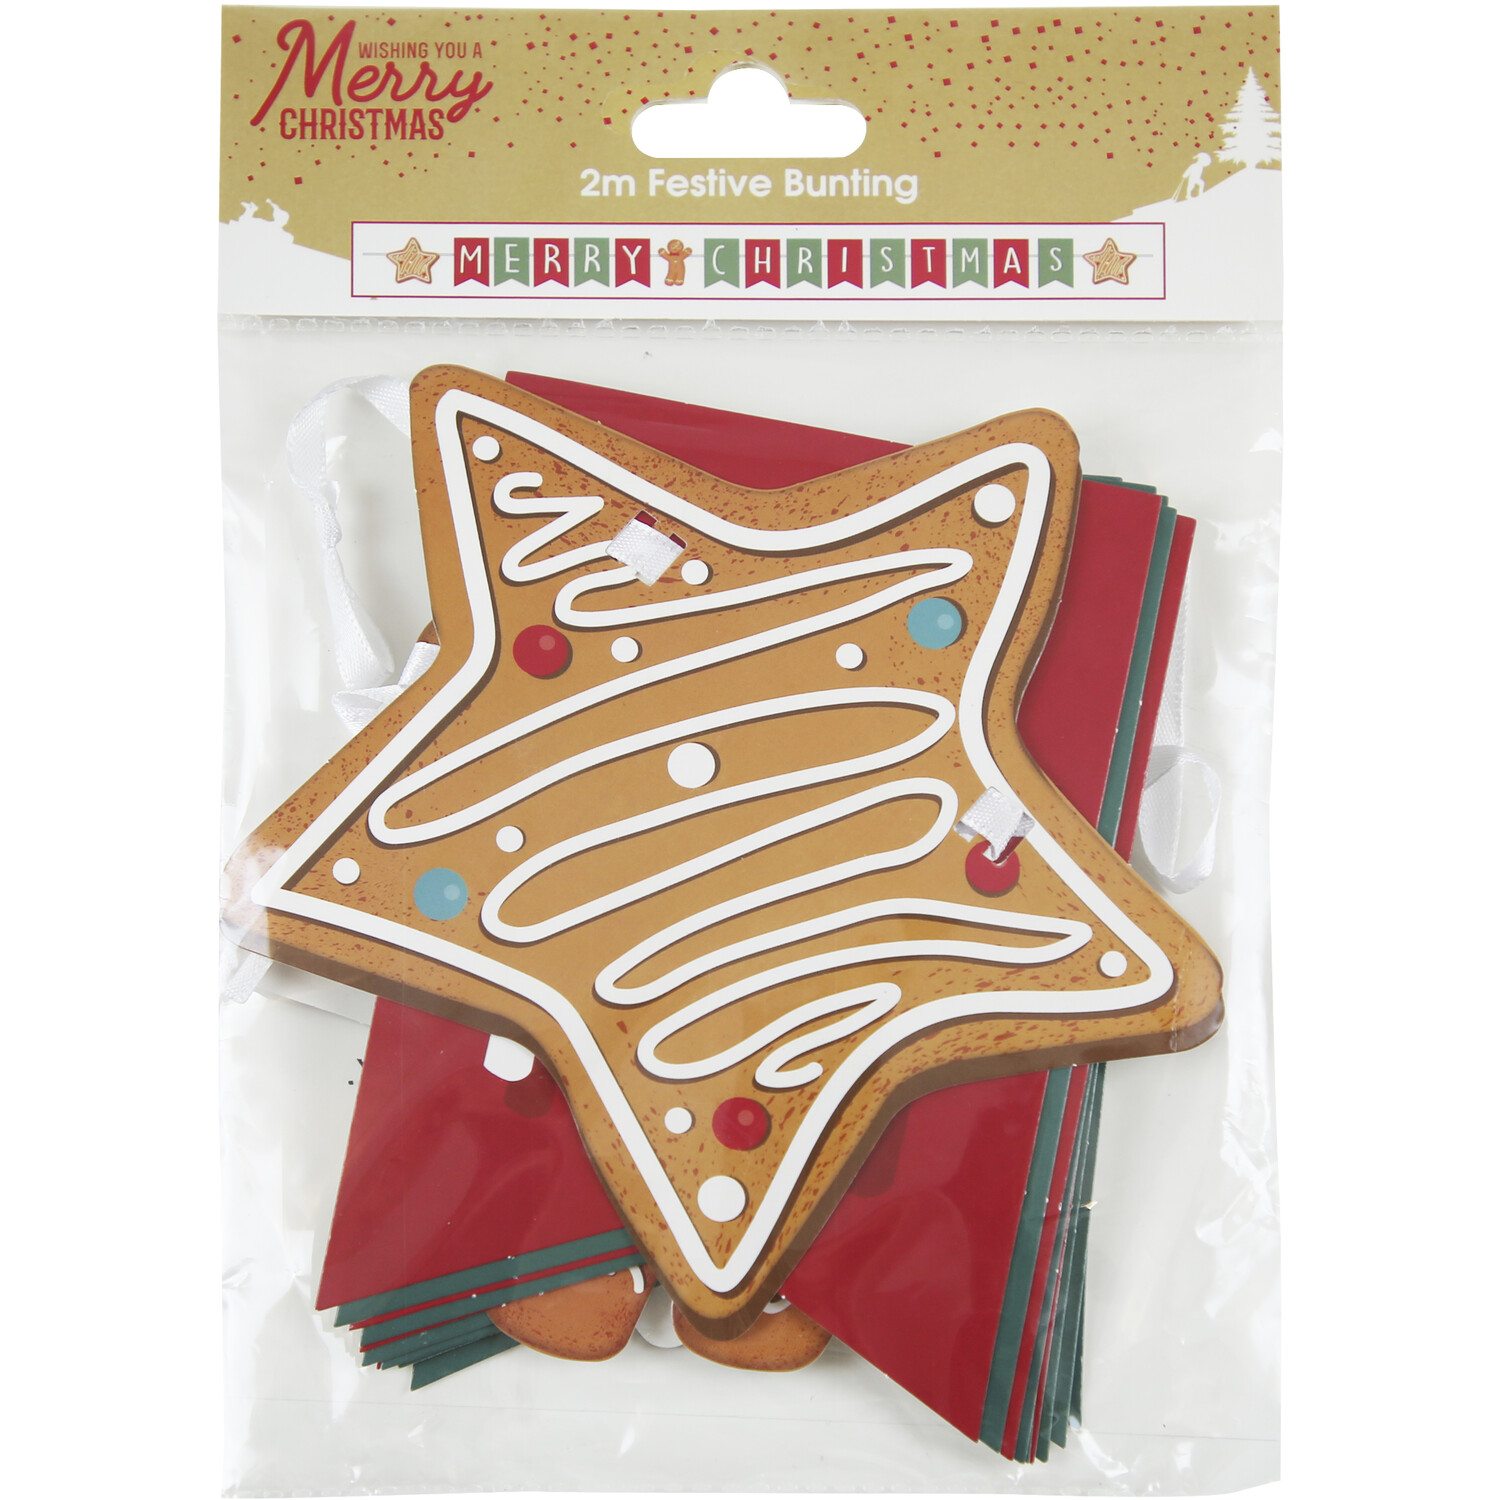 2m Festive Gingerbread Bunting Image